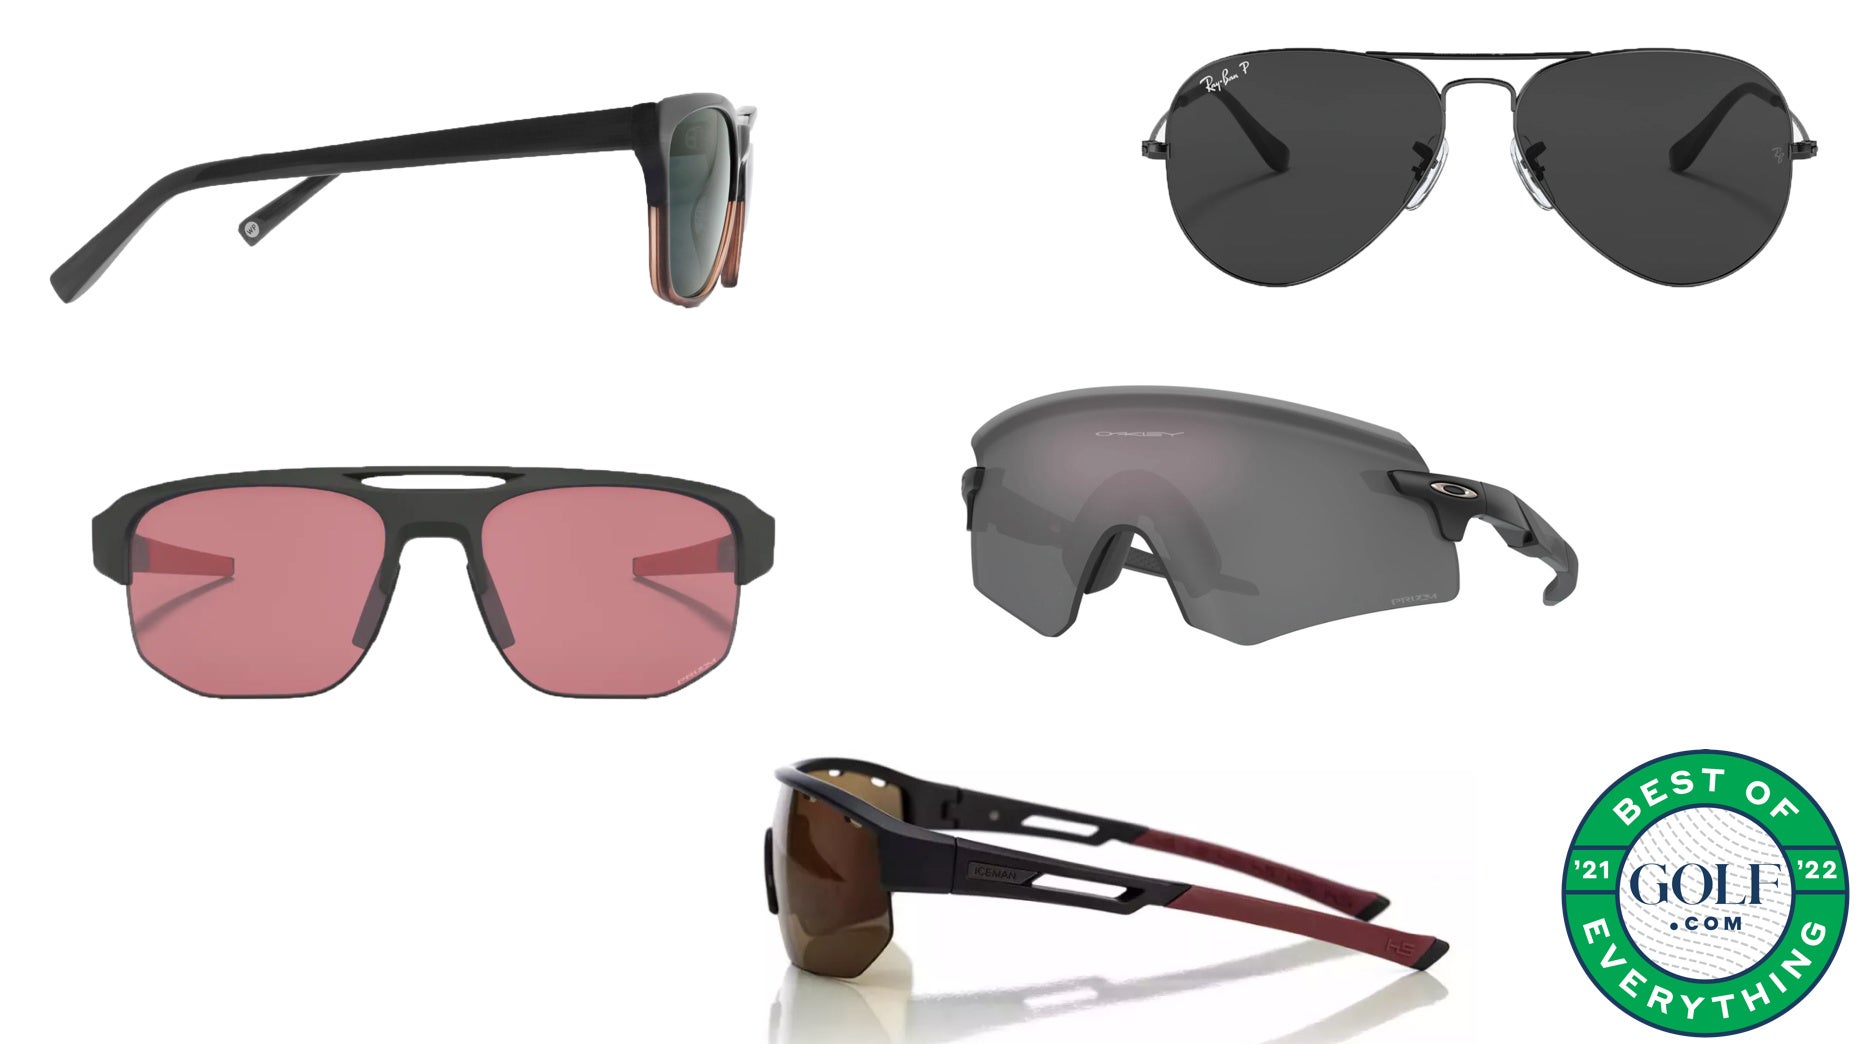 Best of Everything 2021/22: The best golf sunglasses for every occasion